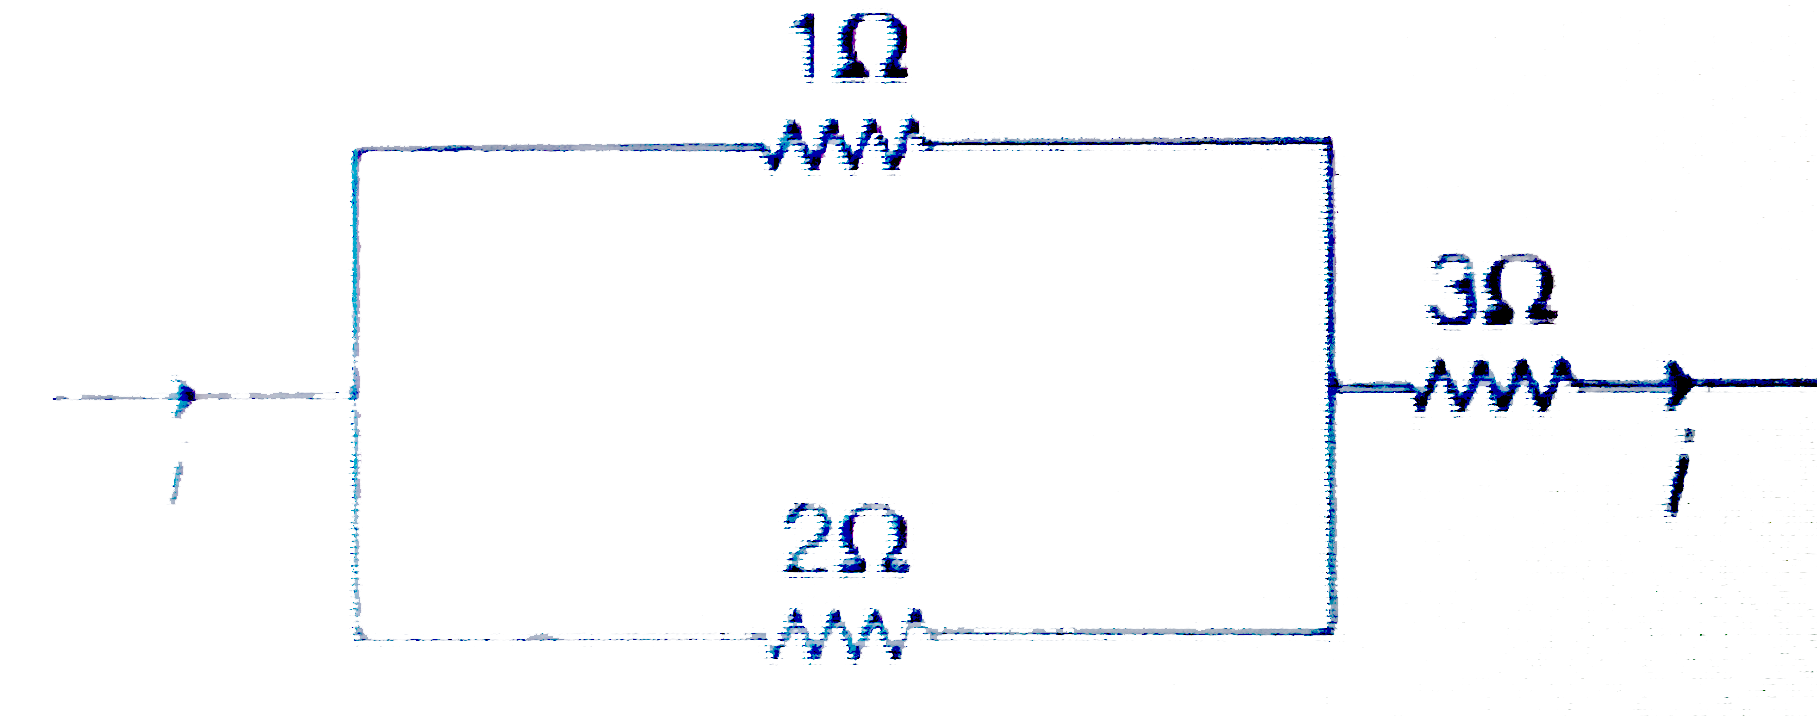 In the circuit shown in figure, power developed across 1 Omega, 2 Omega and 3 Omega resistance are in the ratio of